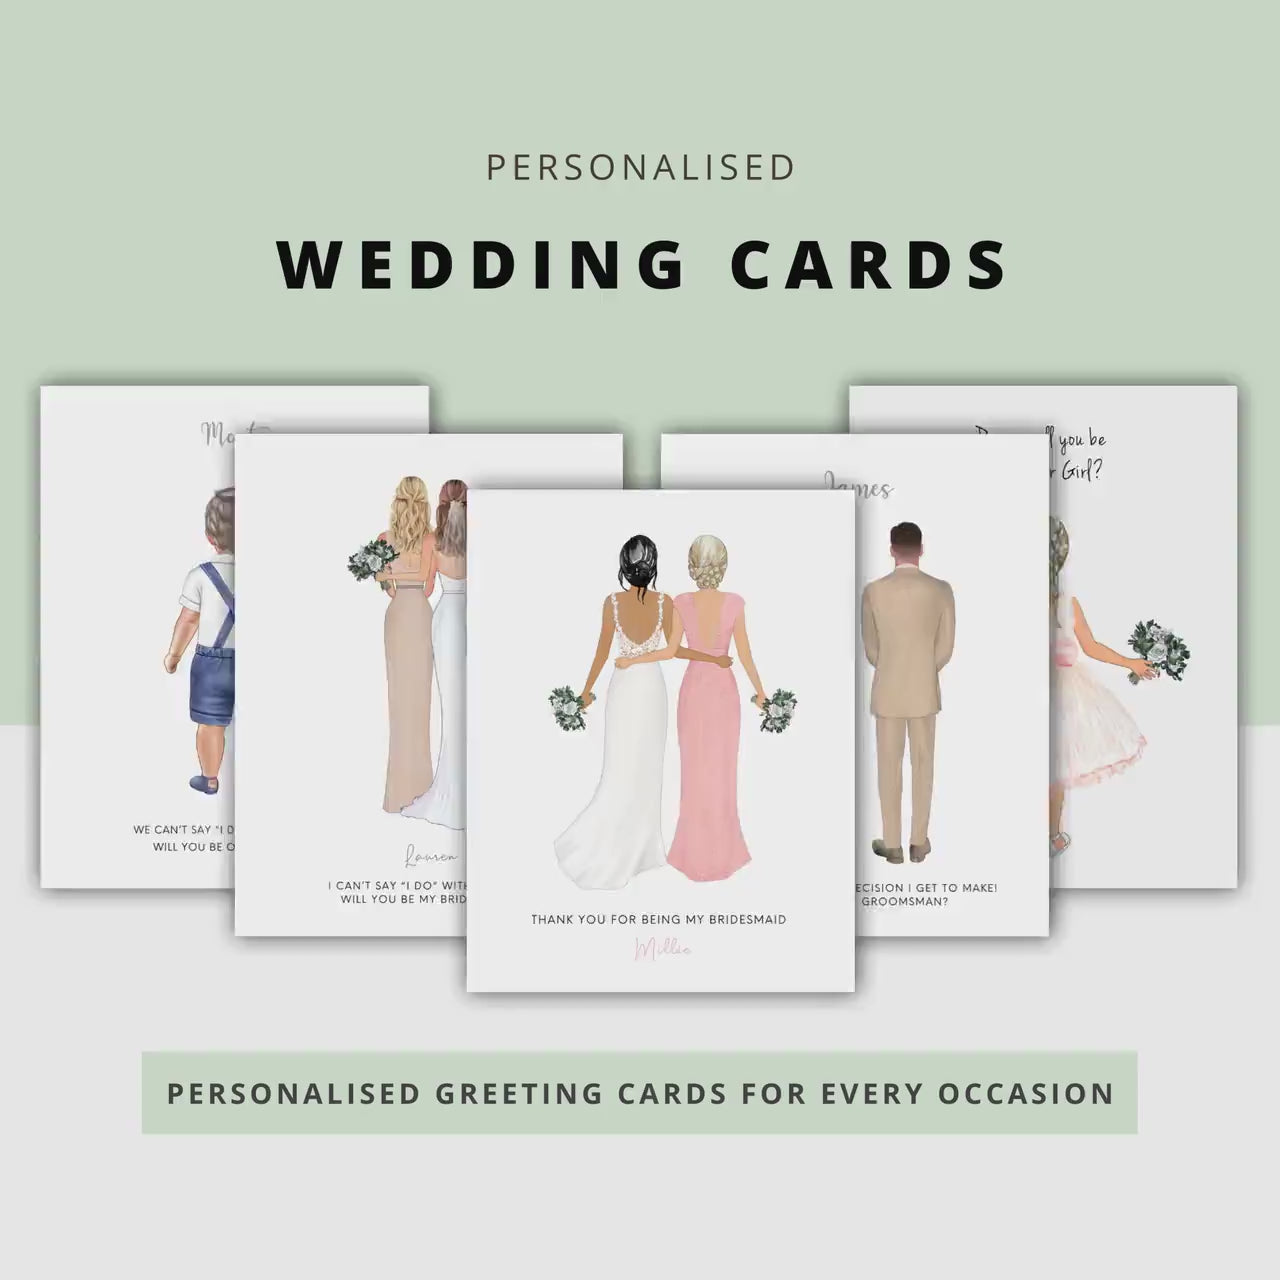 Personalised Page Boy Proposal Card, Will You Be Our Page Boy Card, From the Bride and Groom Card, Mini Groomsman Wedding Proposal Card